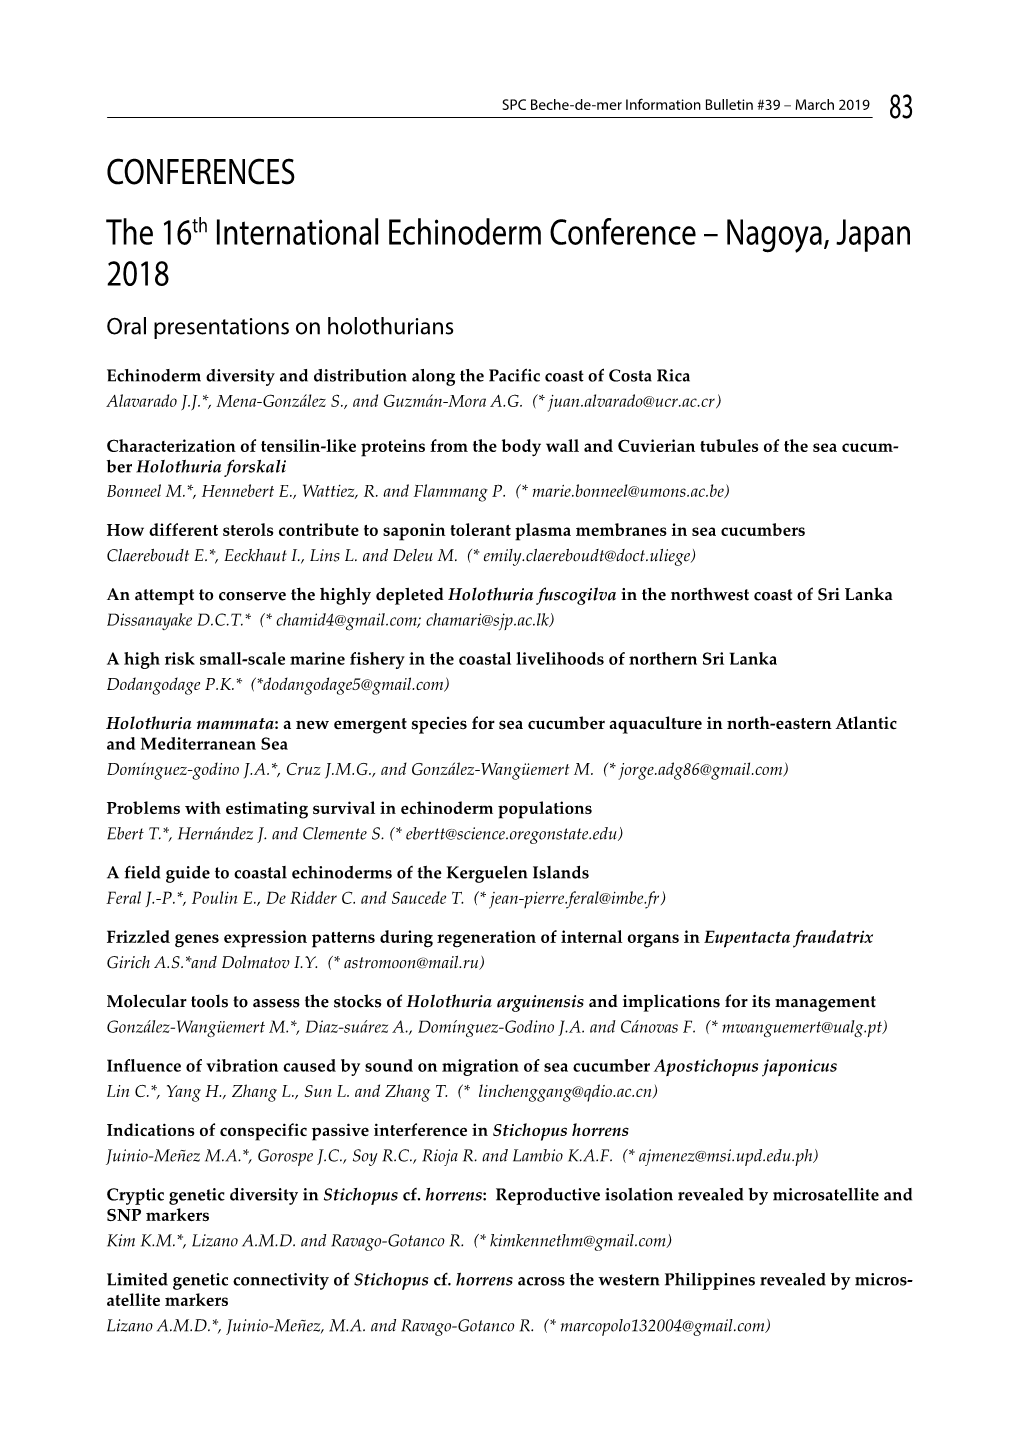 CONFERENCES the 16Th International Echinoderm Conference – Nagoya, Japan 2018 Oral Presentations on Holothurians